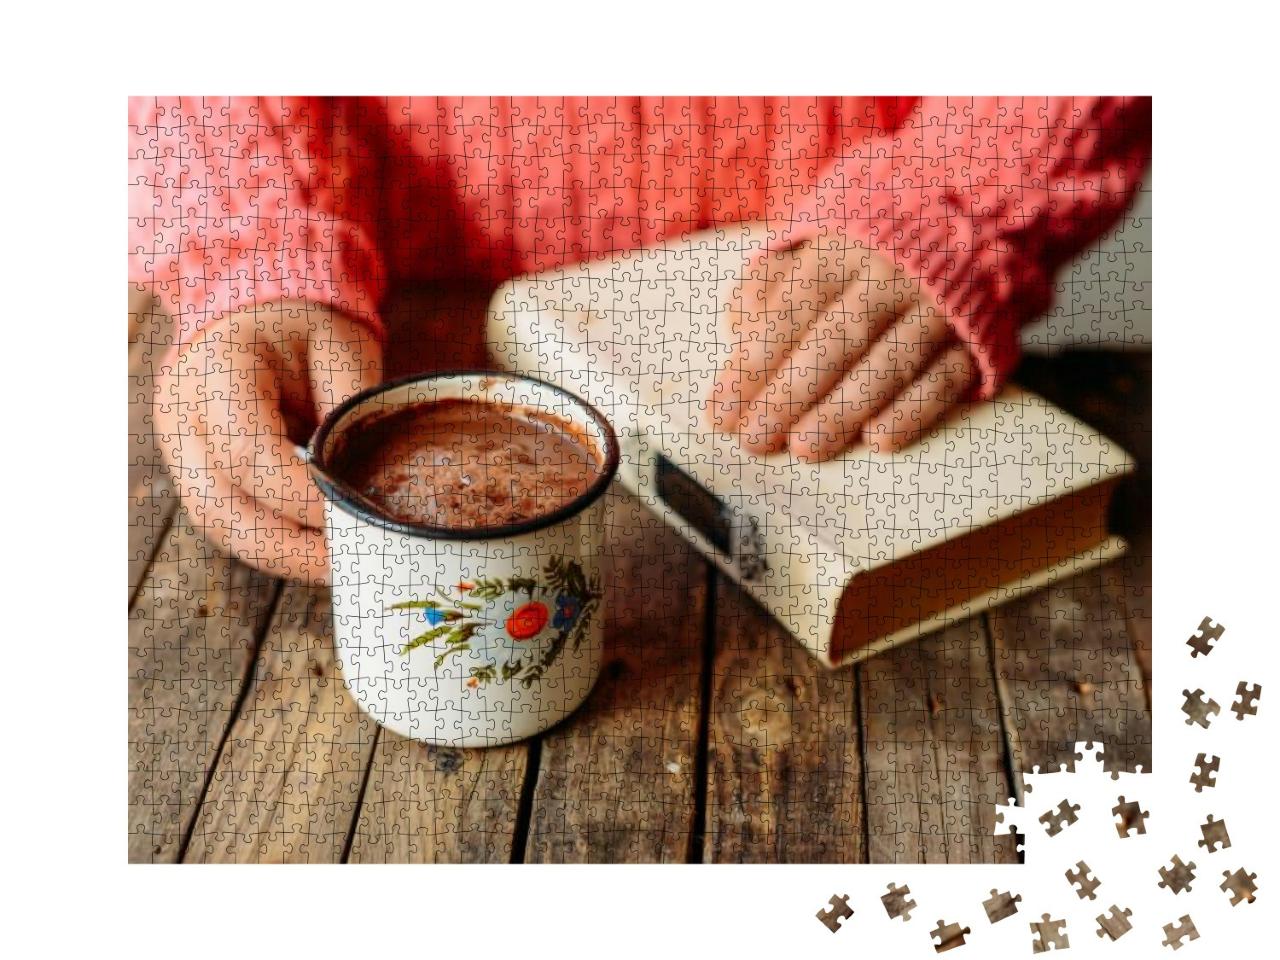 Woman Holding Cup of Hot Chocolate. Hot Chocolate in Wood... Jigsaw Puzzle with 1000 pieces